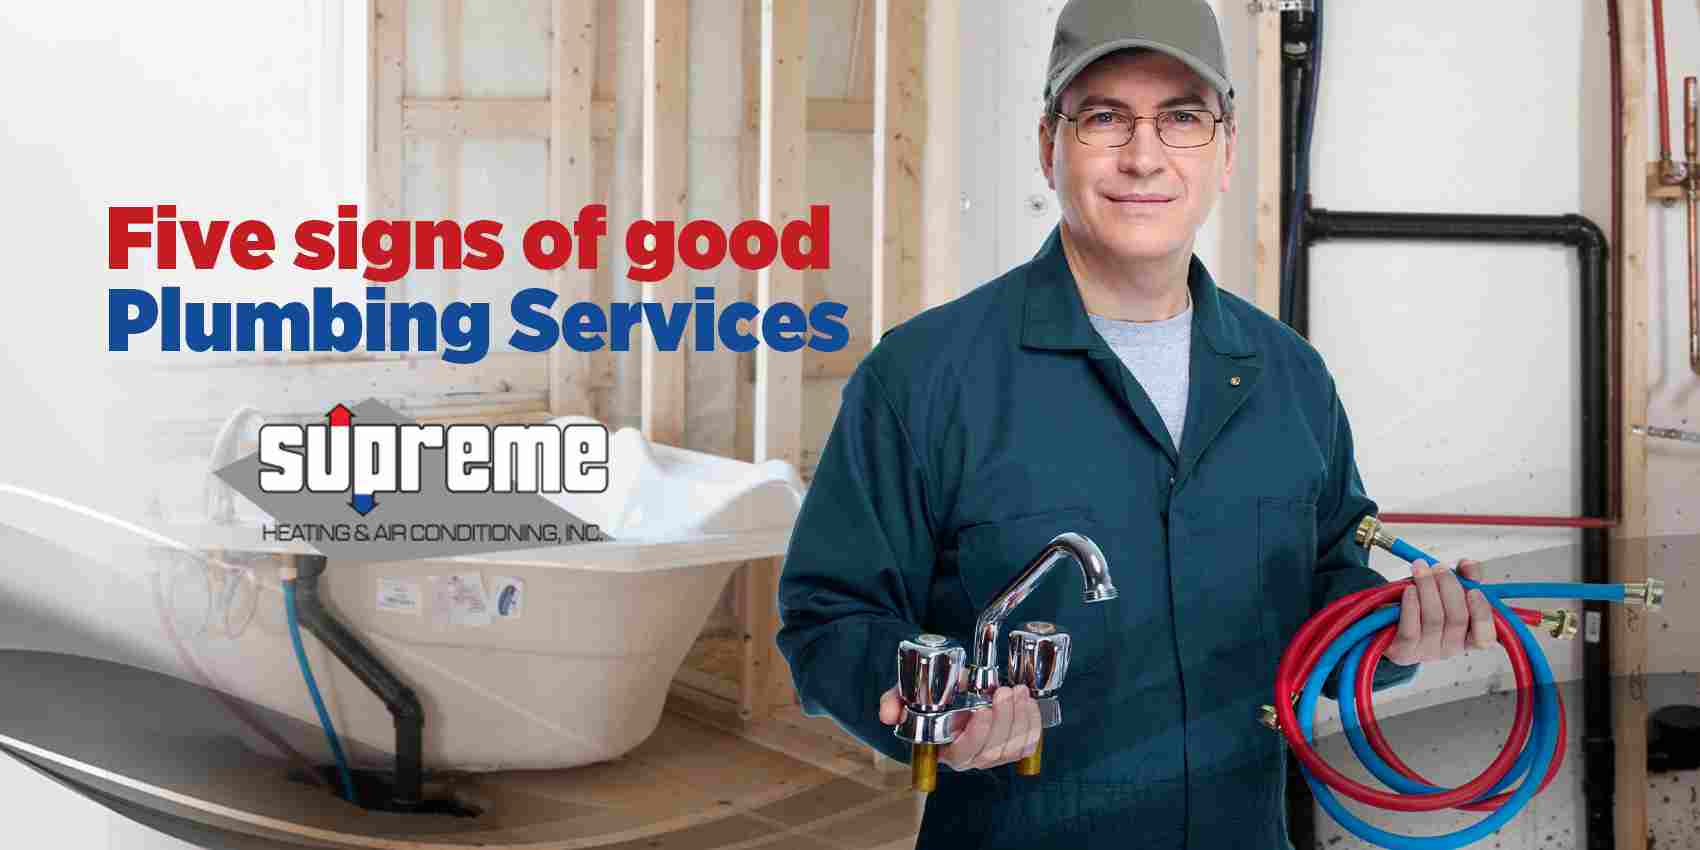 Supreme-Heating-Air-Conditioning-Inc.